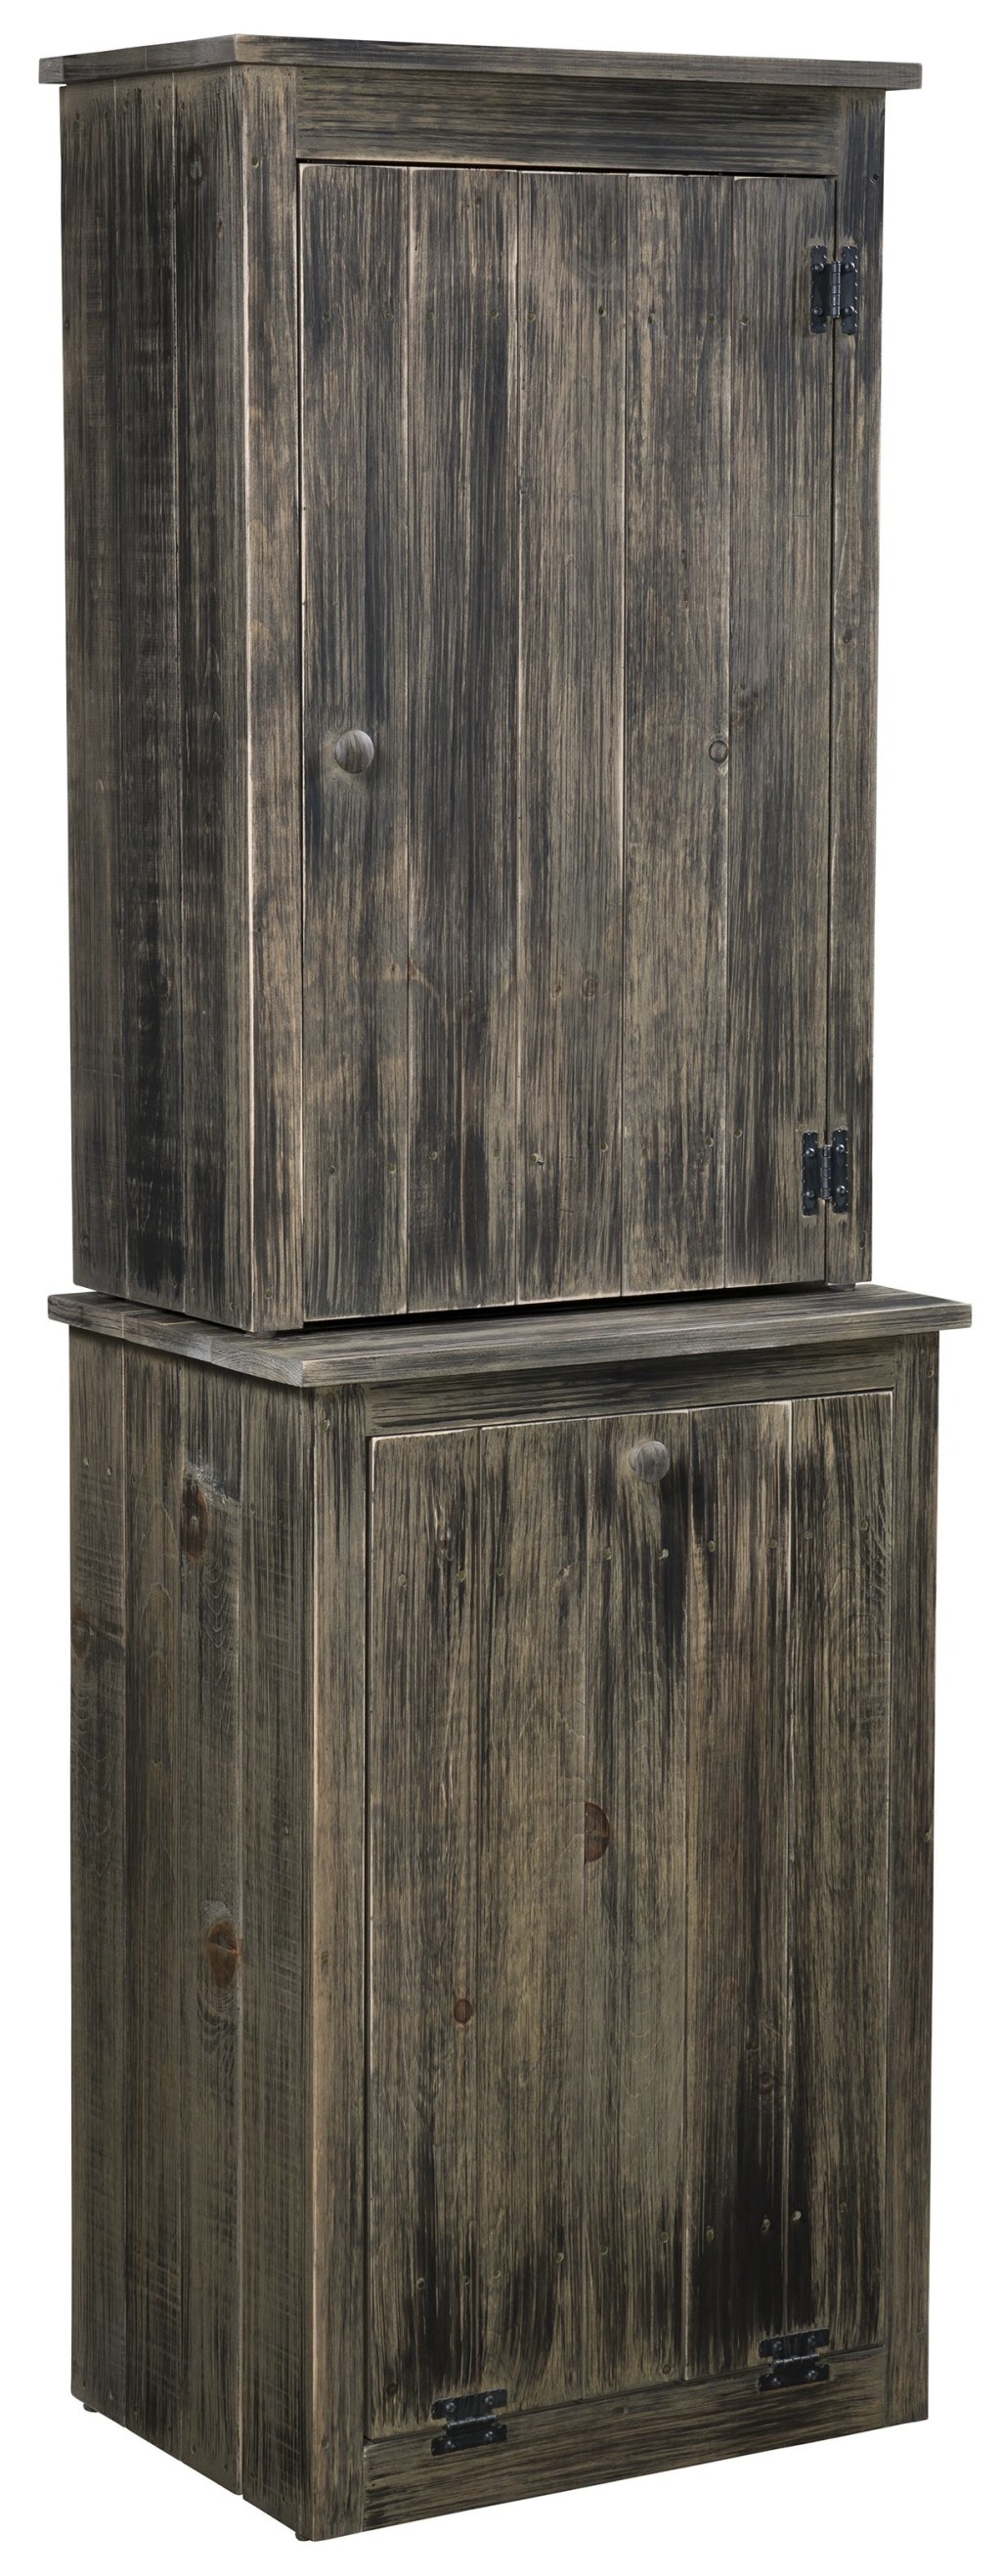 Picture of: Amish Gold Mine Trash Bin with Optional Hutch